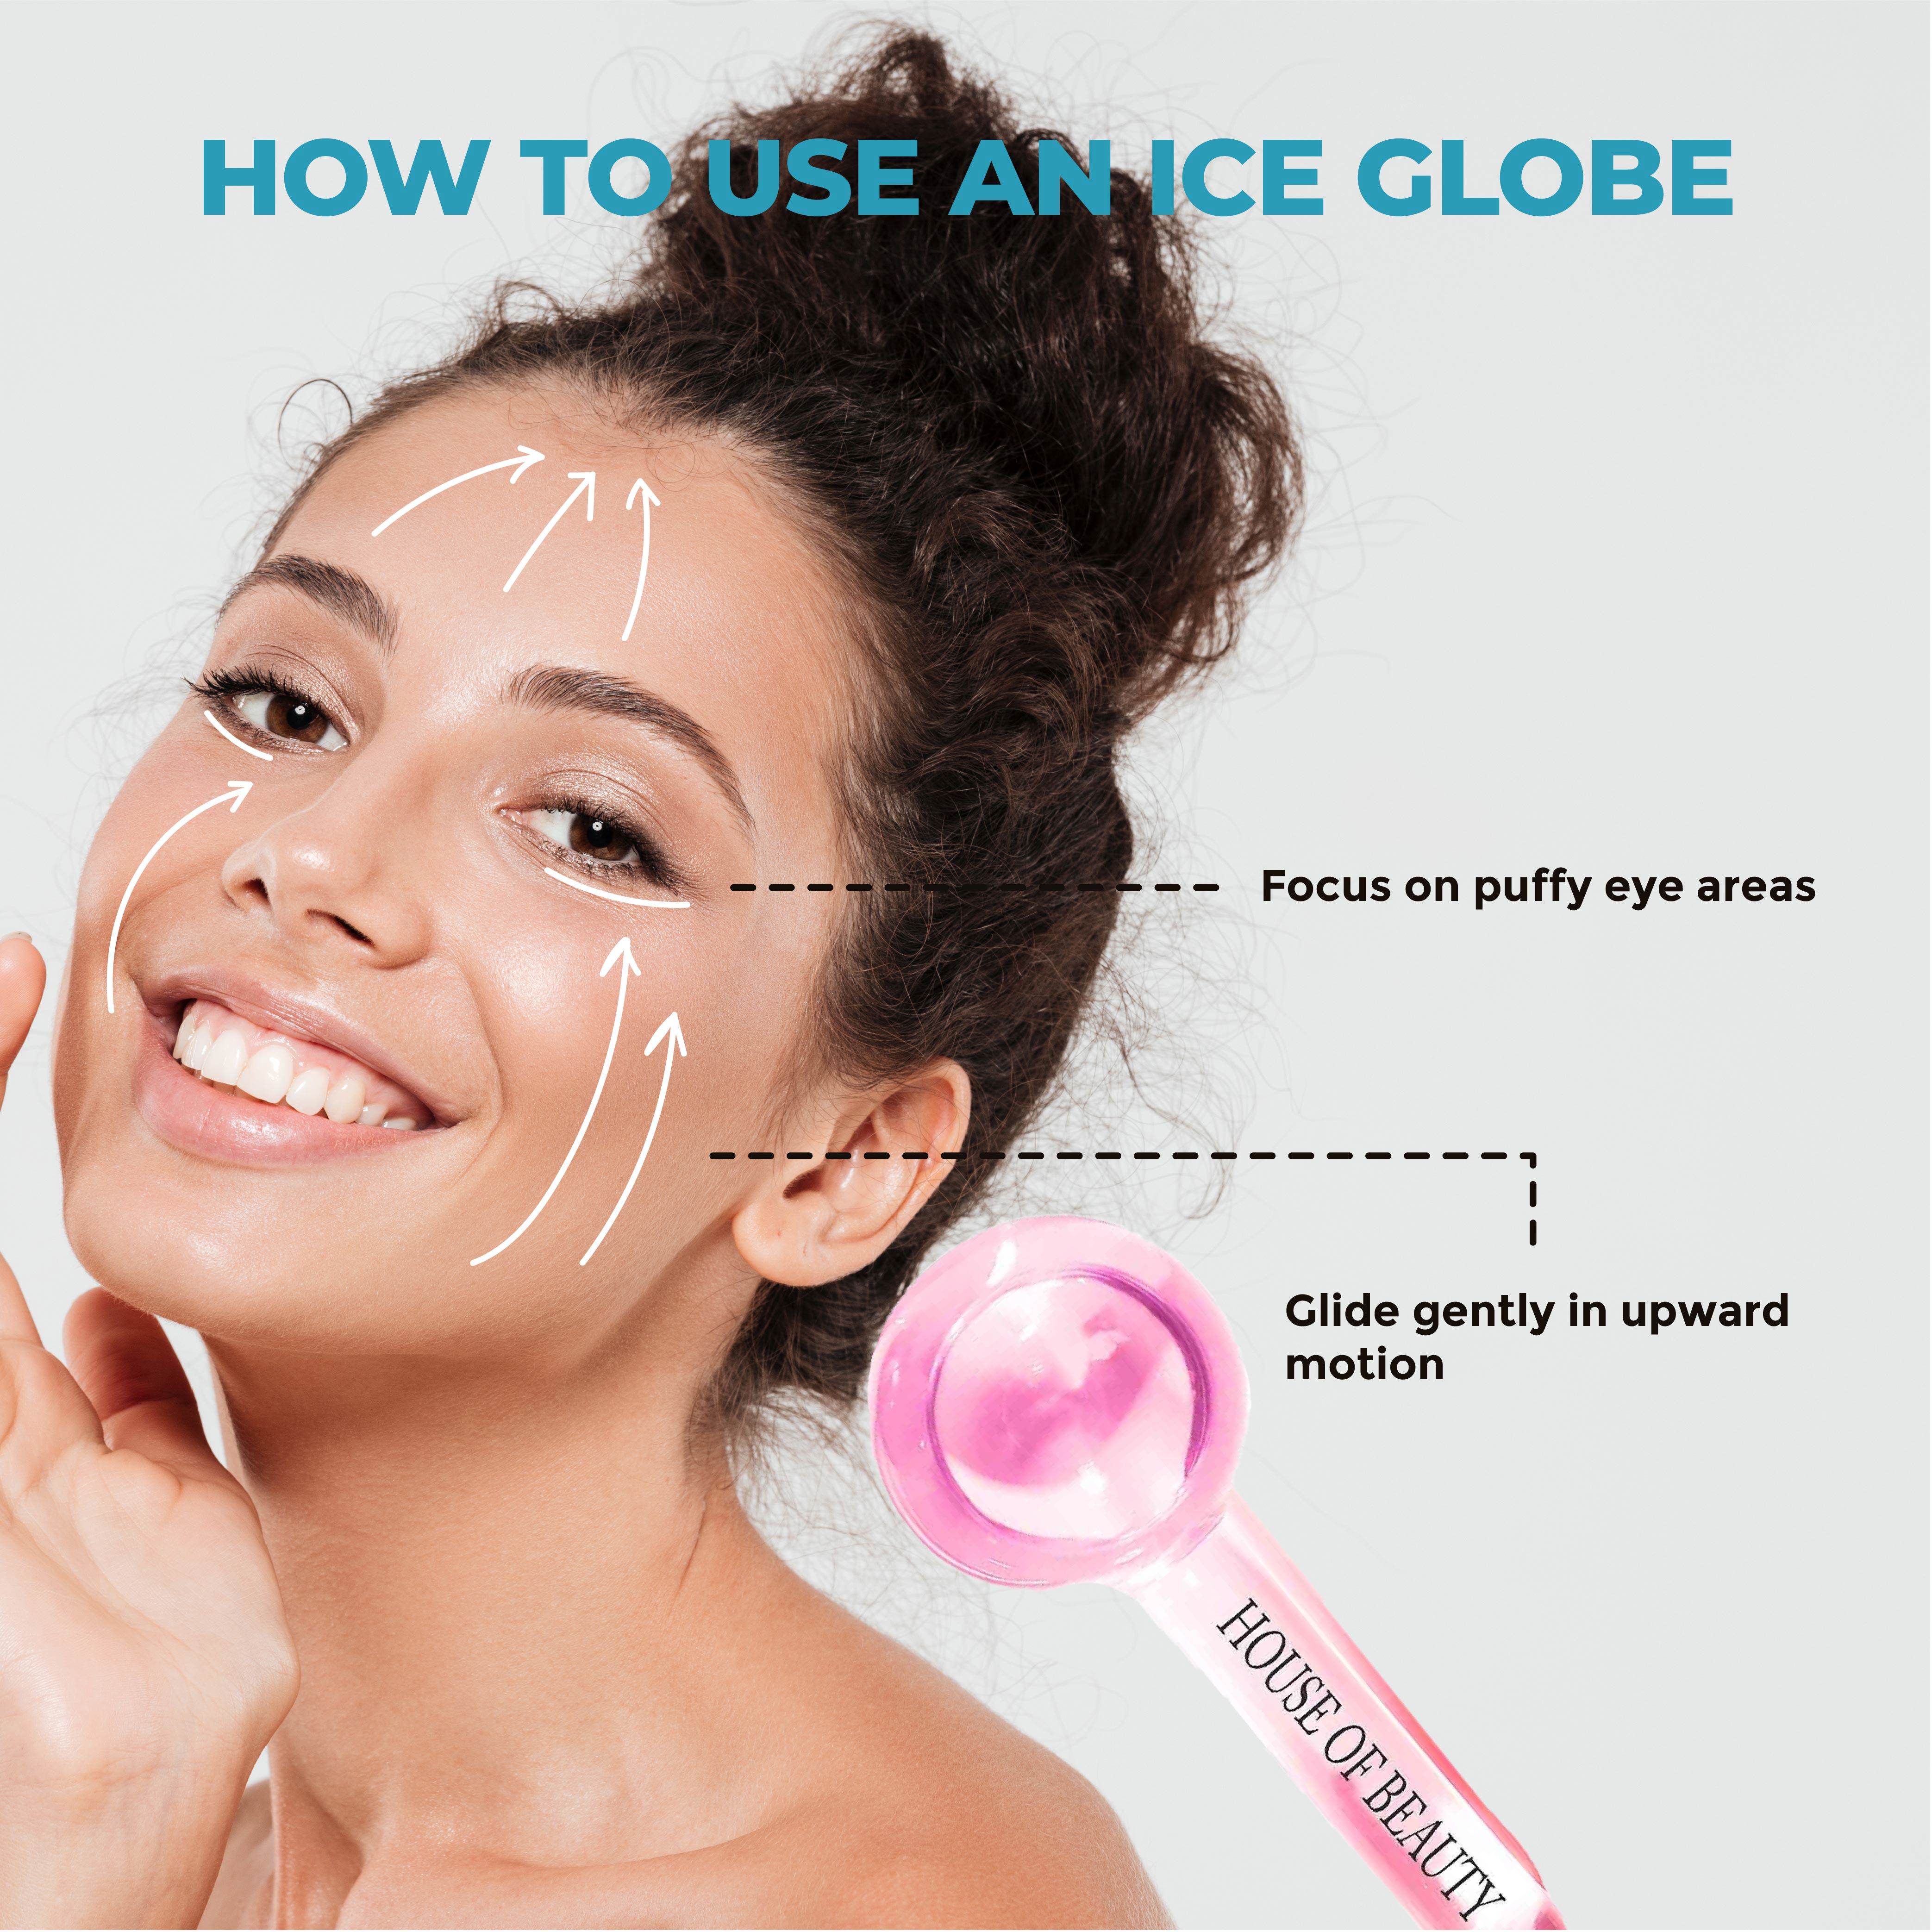 This is an image of how to use House of Beauty Ice Globes